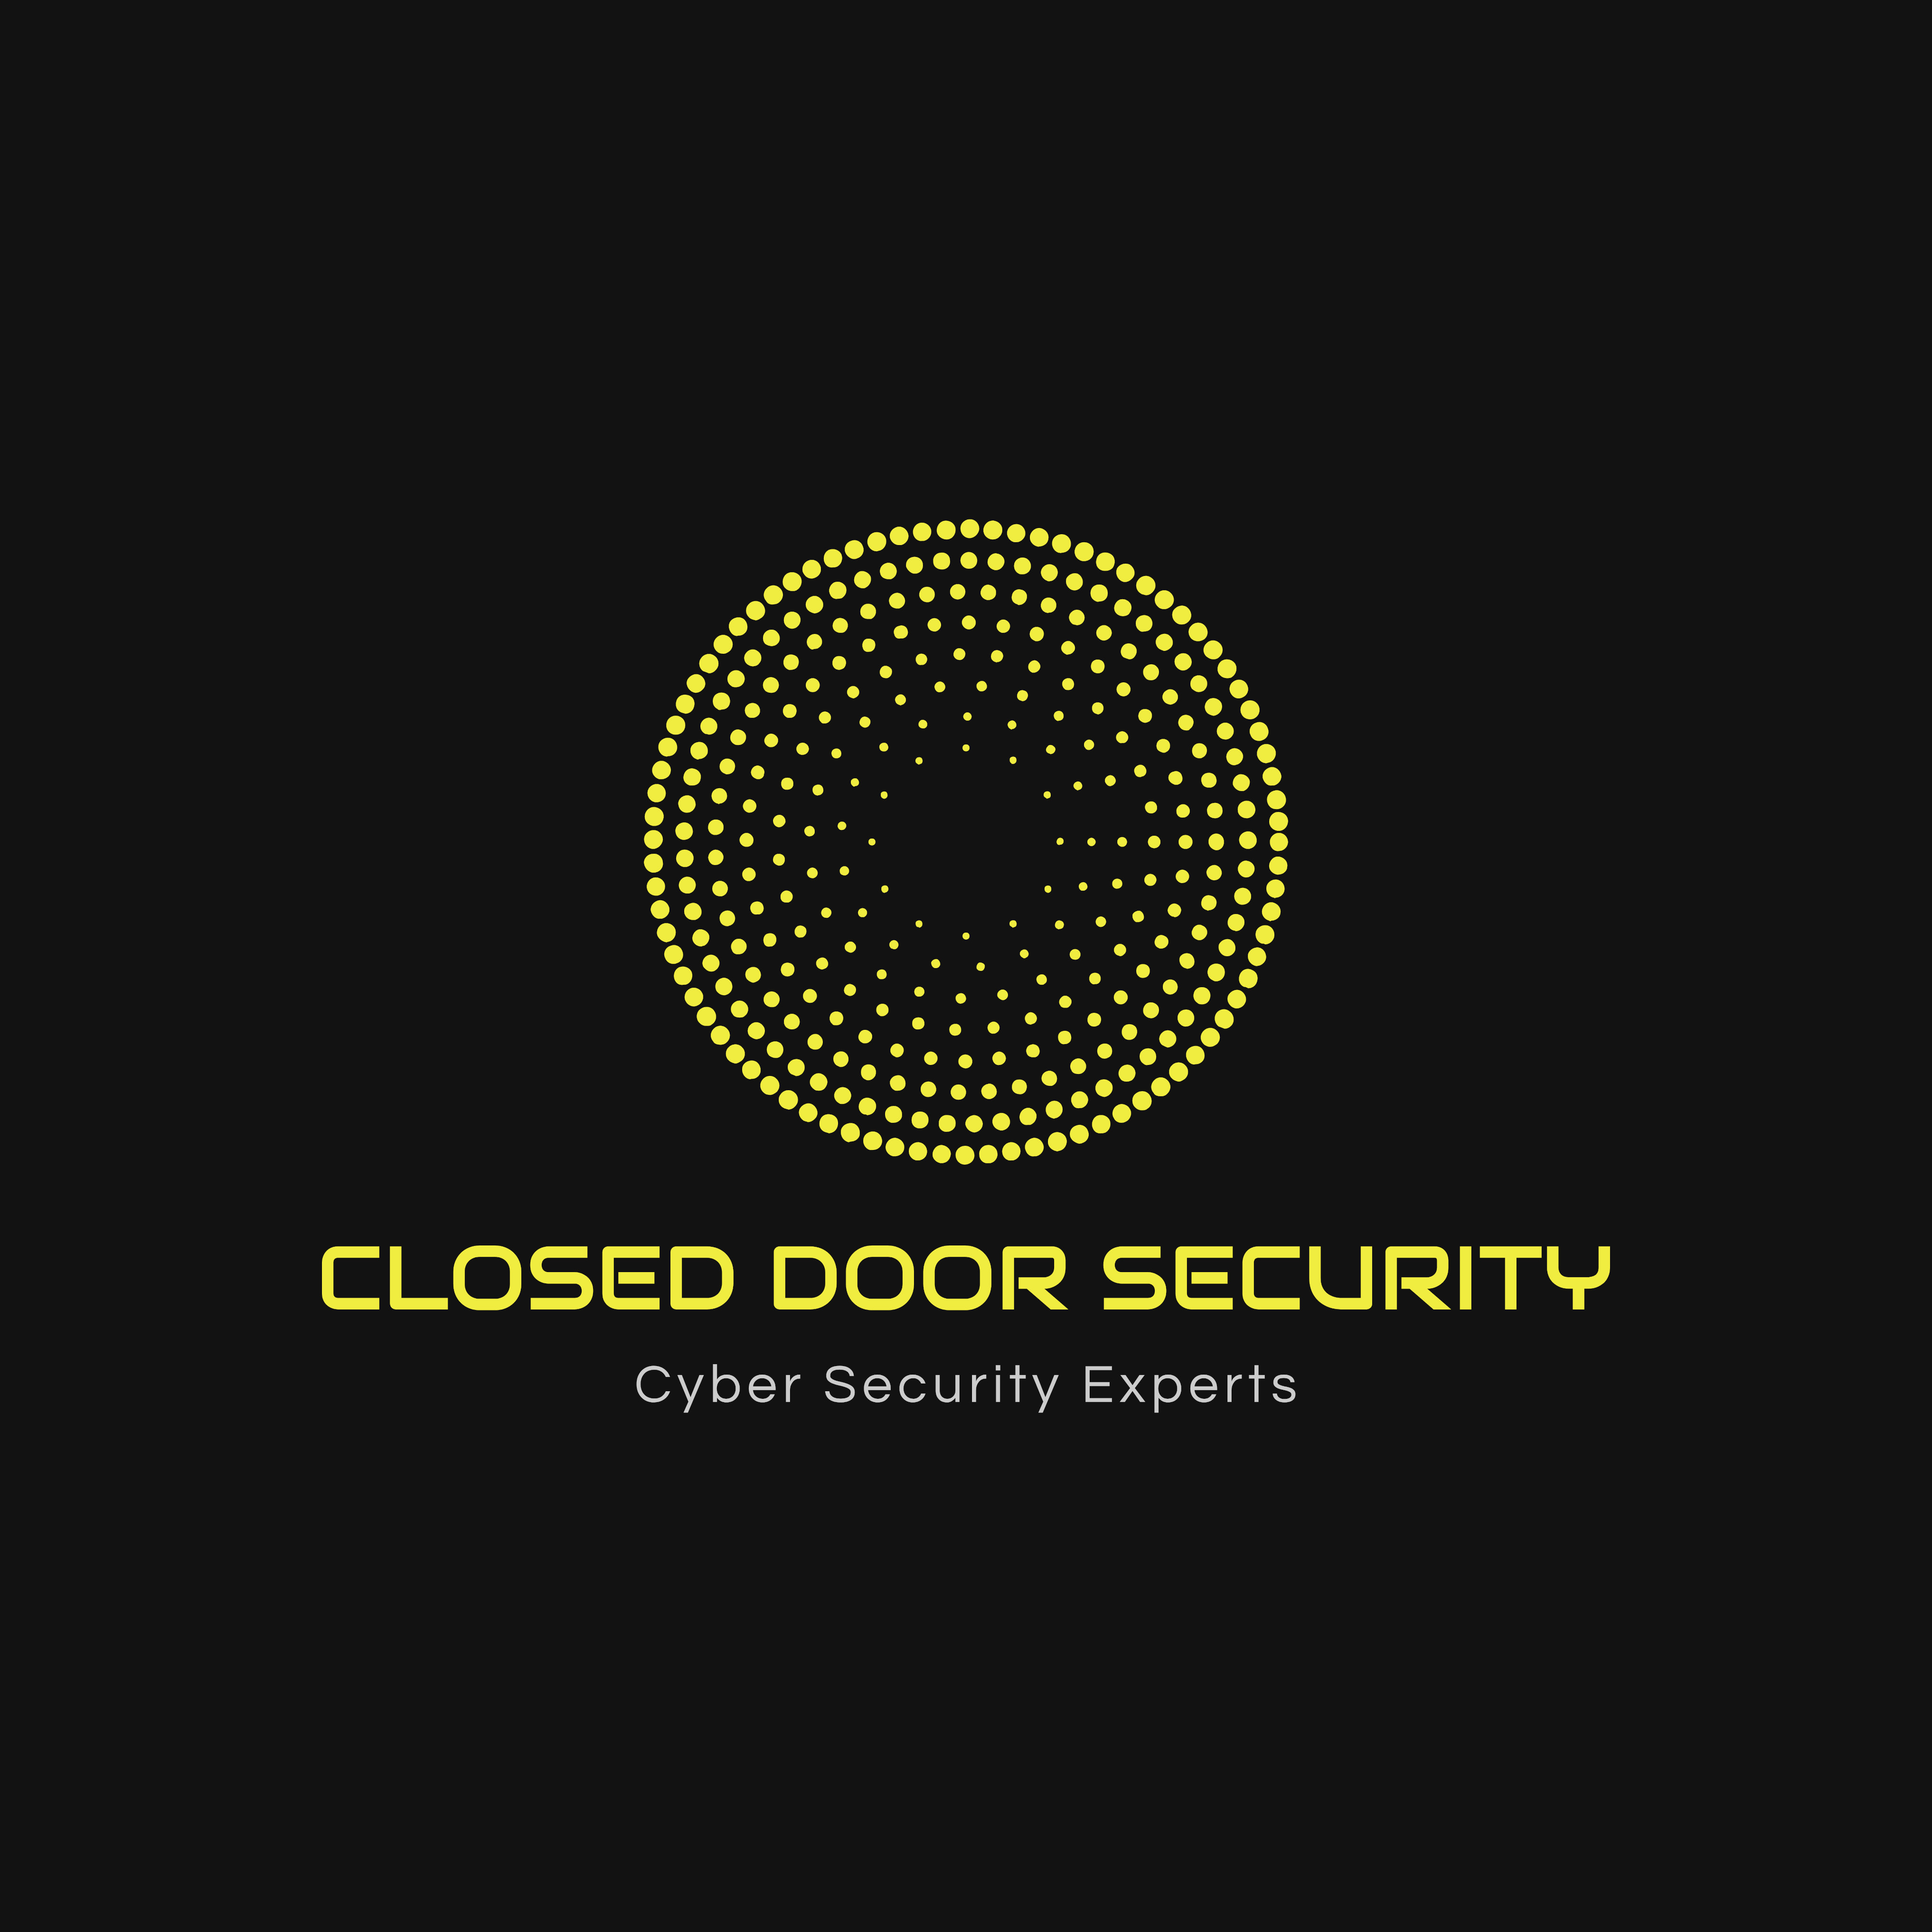 Closed door security tips for malware